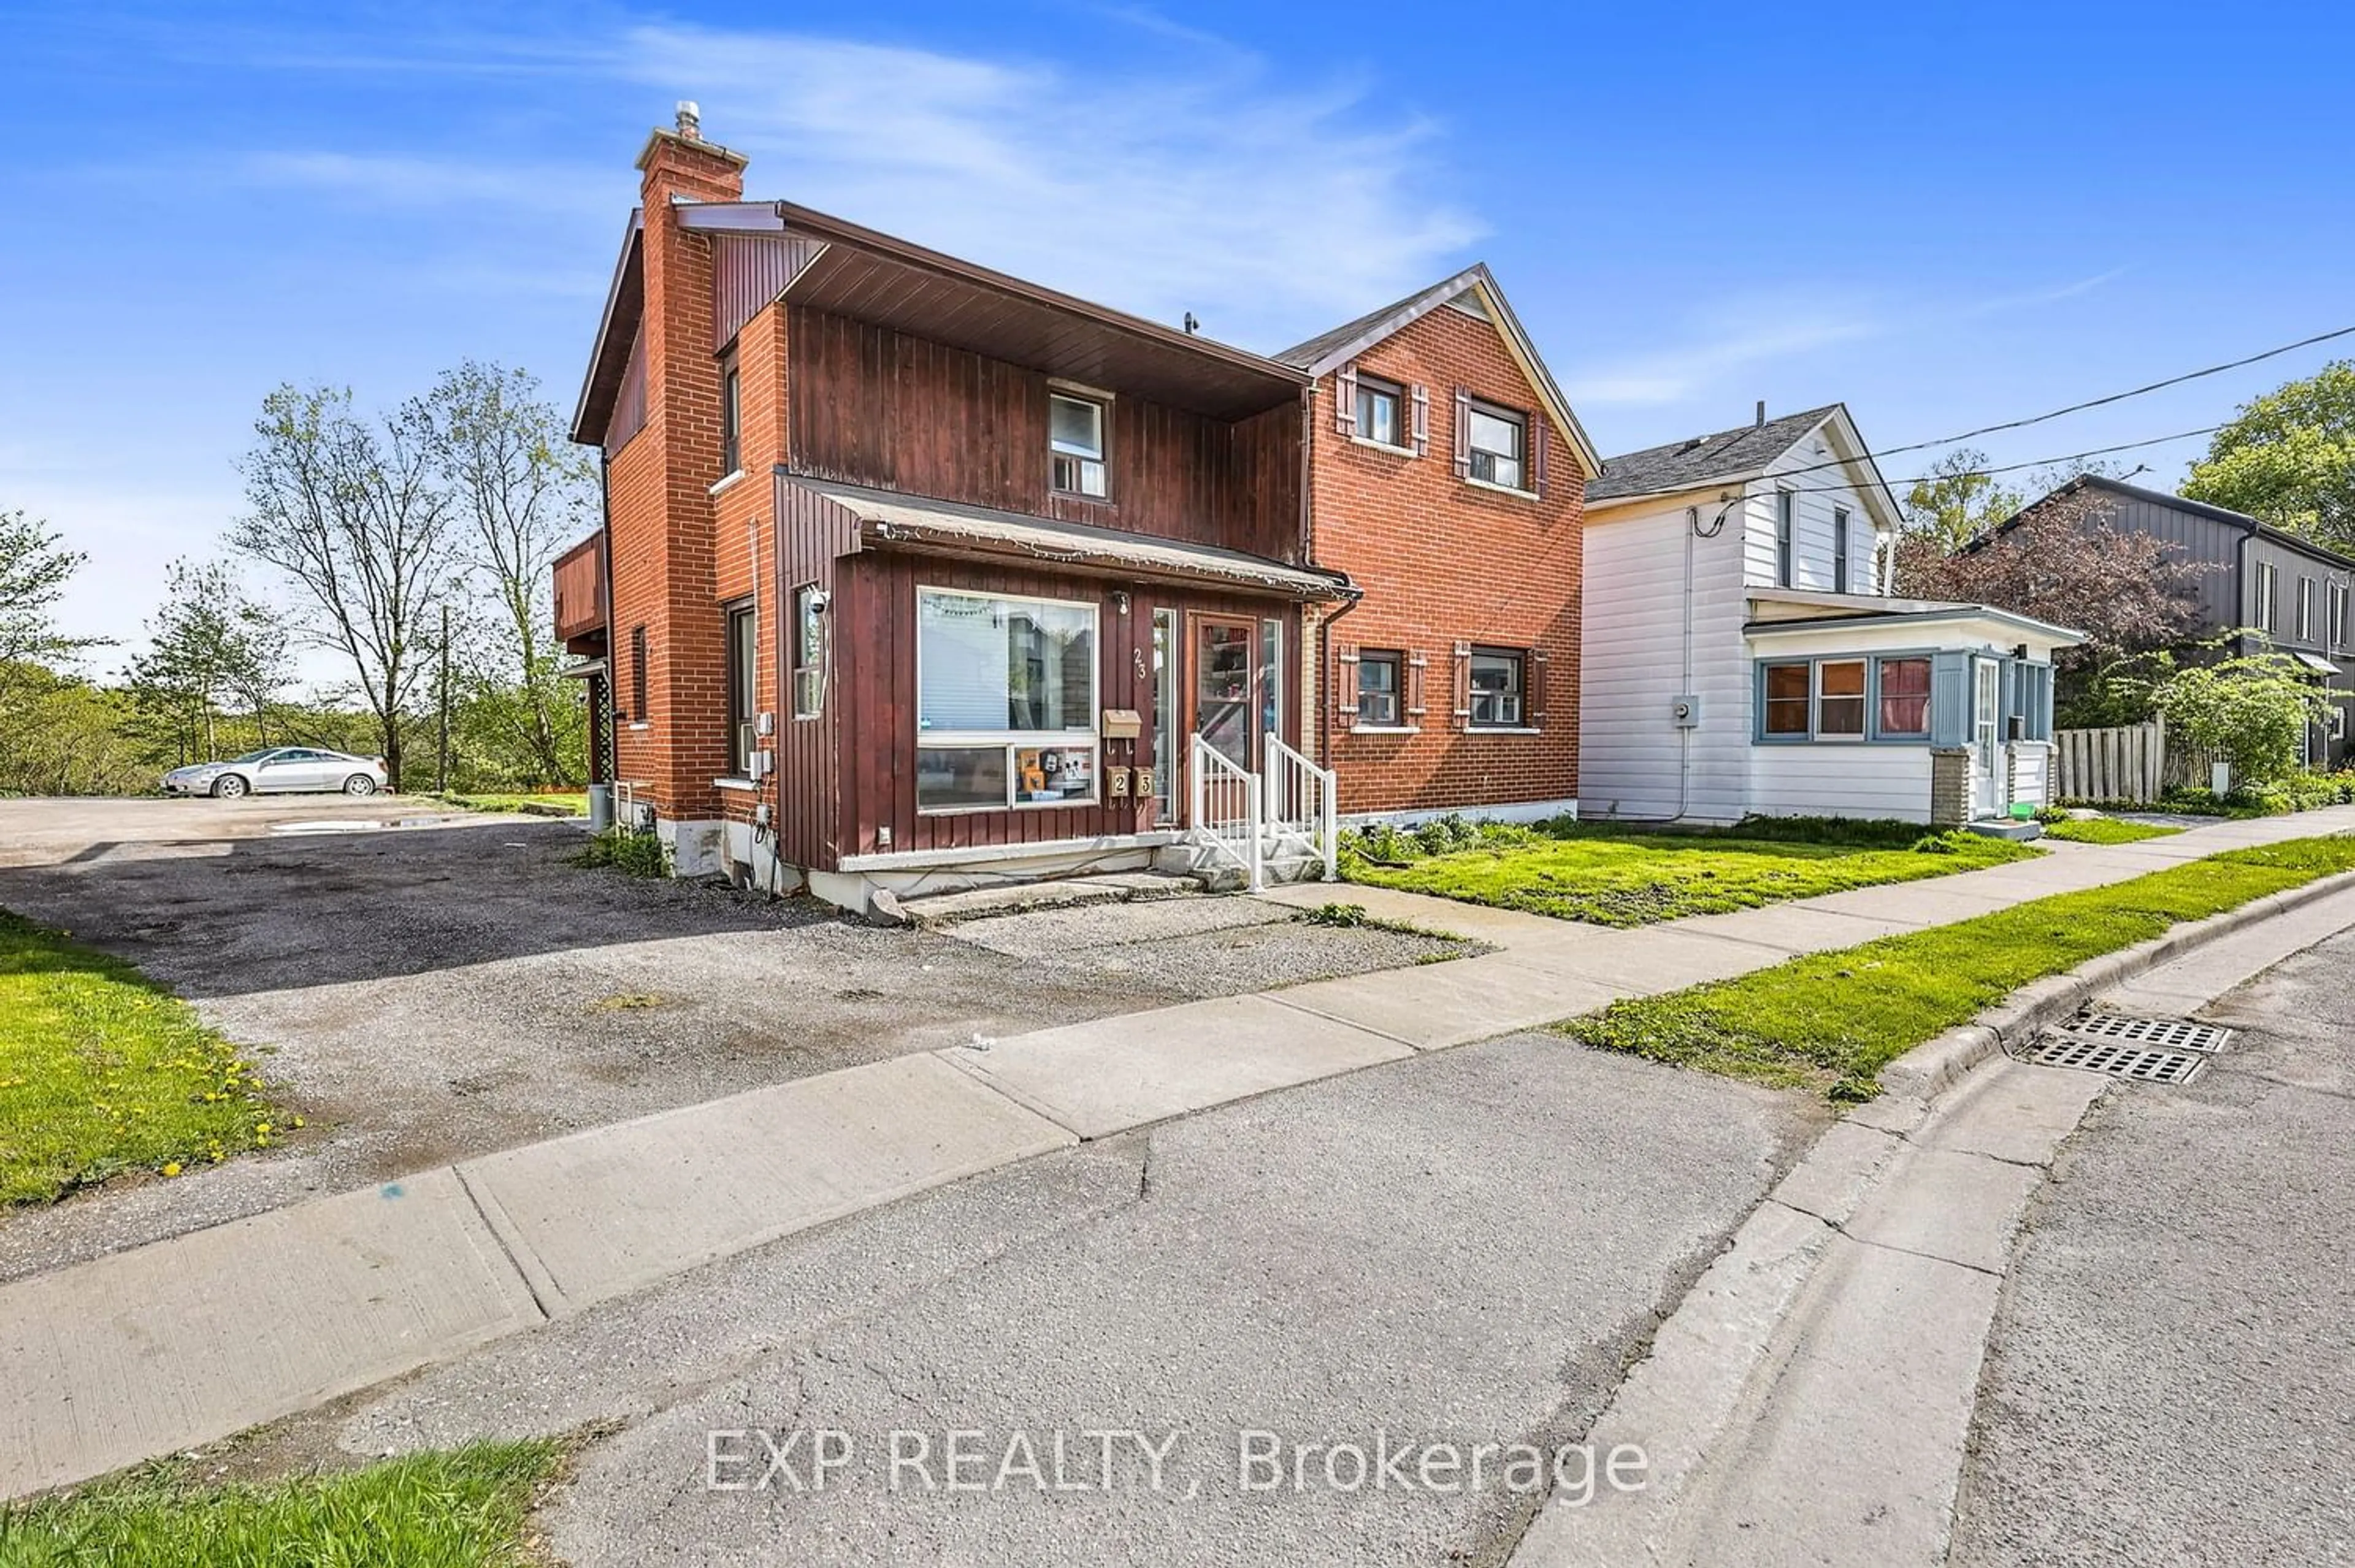 Frontside or backside of a home for 23 Erie St, Oshawa Ontario L1H 3R1